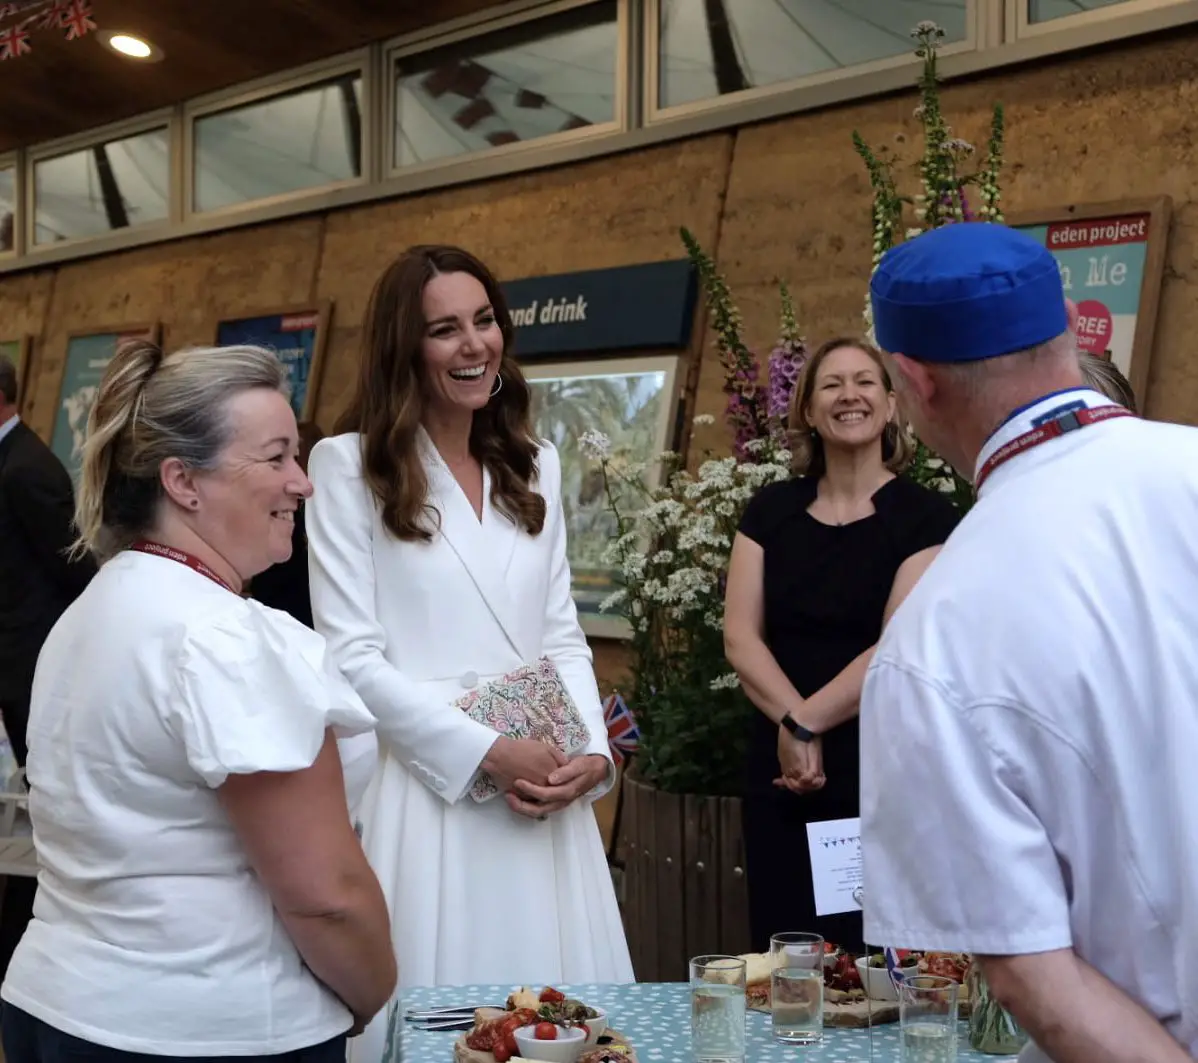 The Duchess of Cambridge with the volunteers of Big Lunch in Cornwall